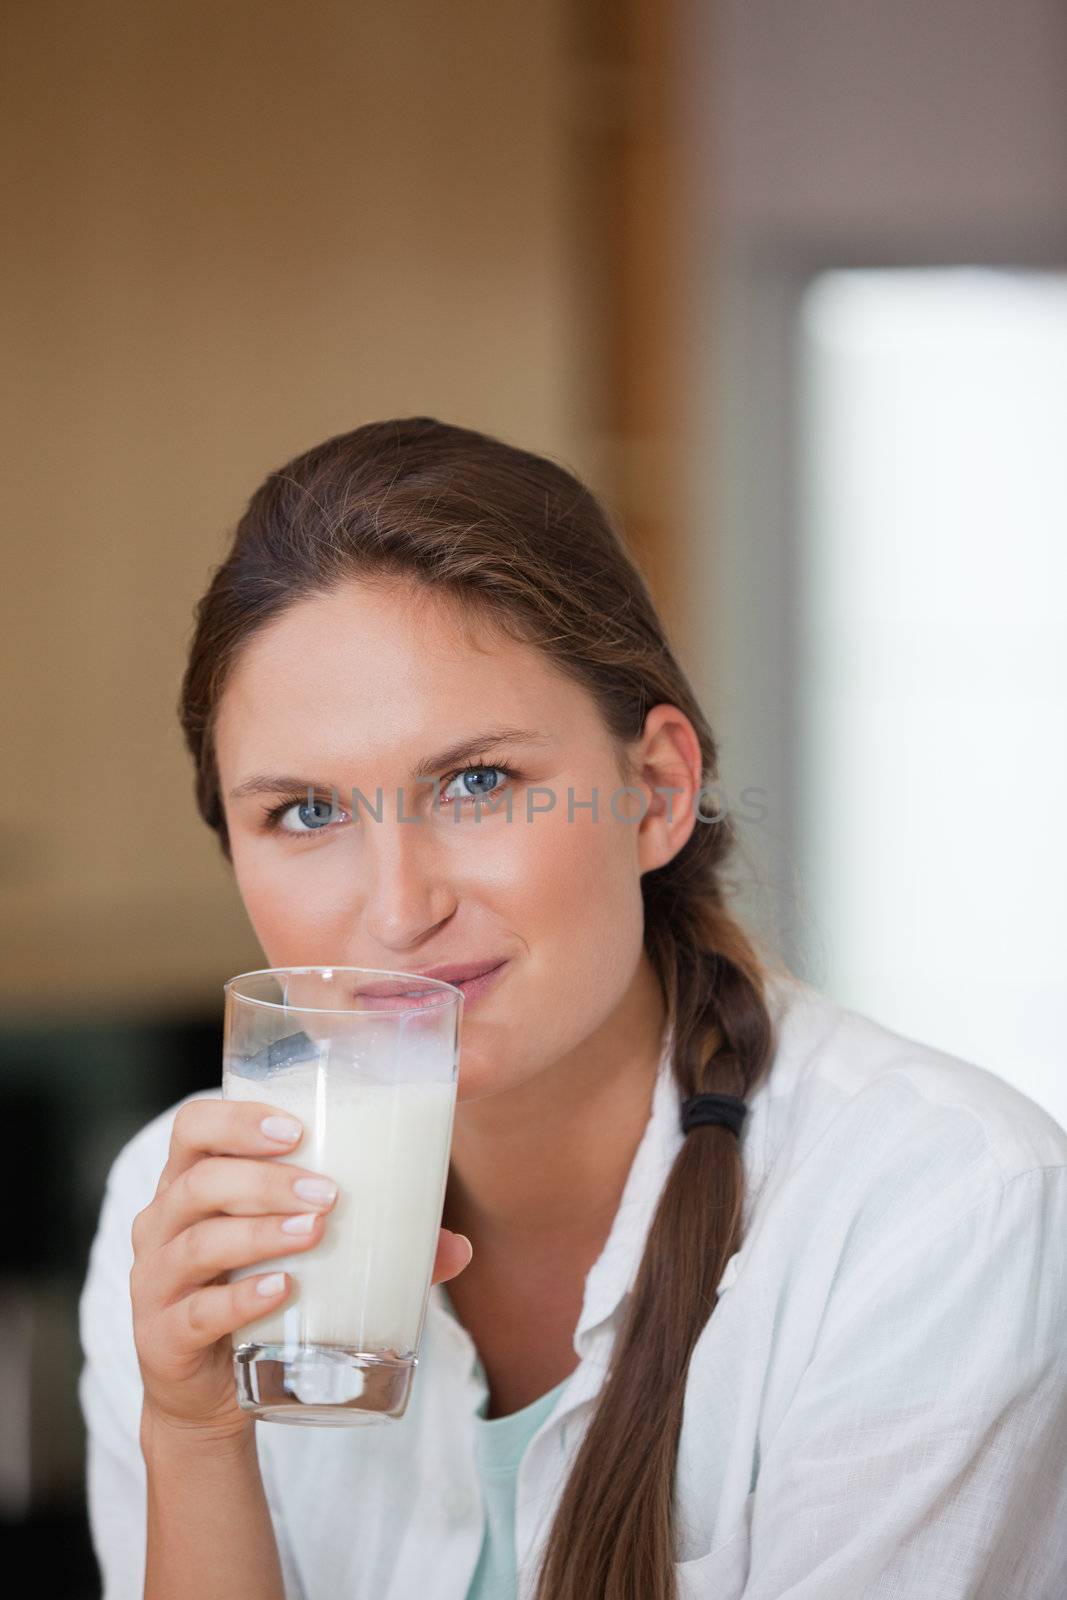 Woman drinking a glass of milk while looking the camera in a kitchen